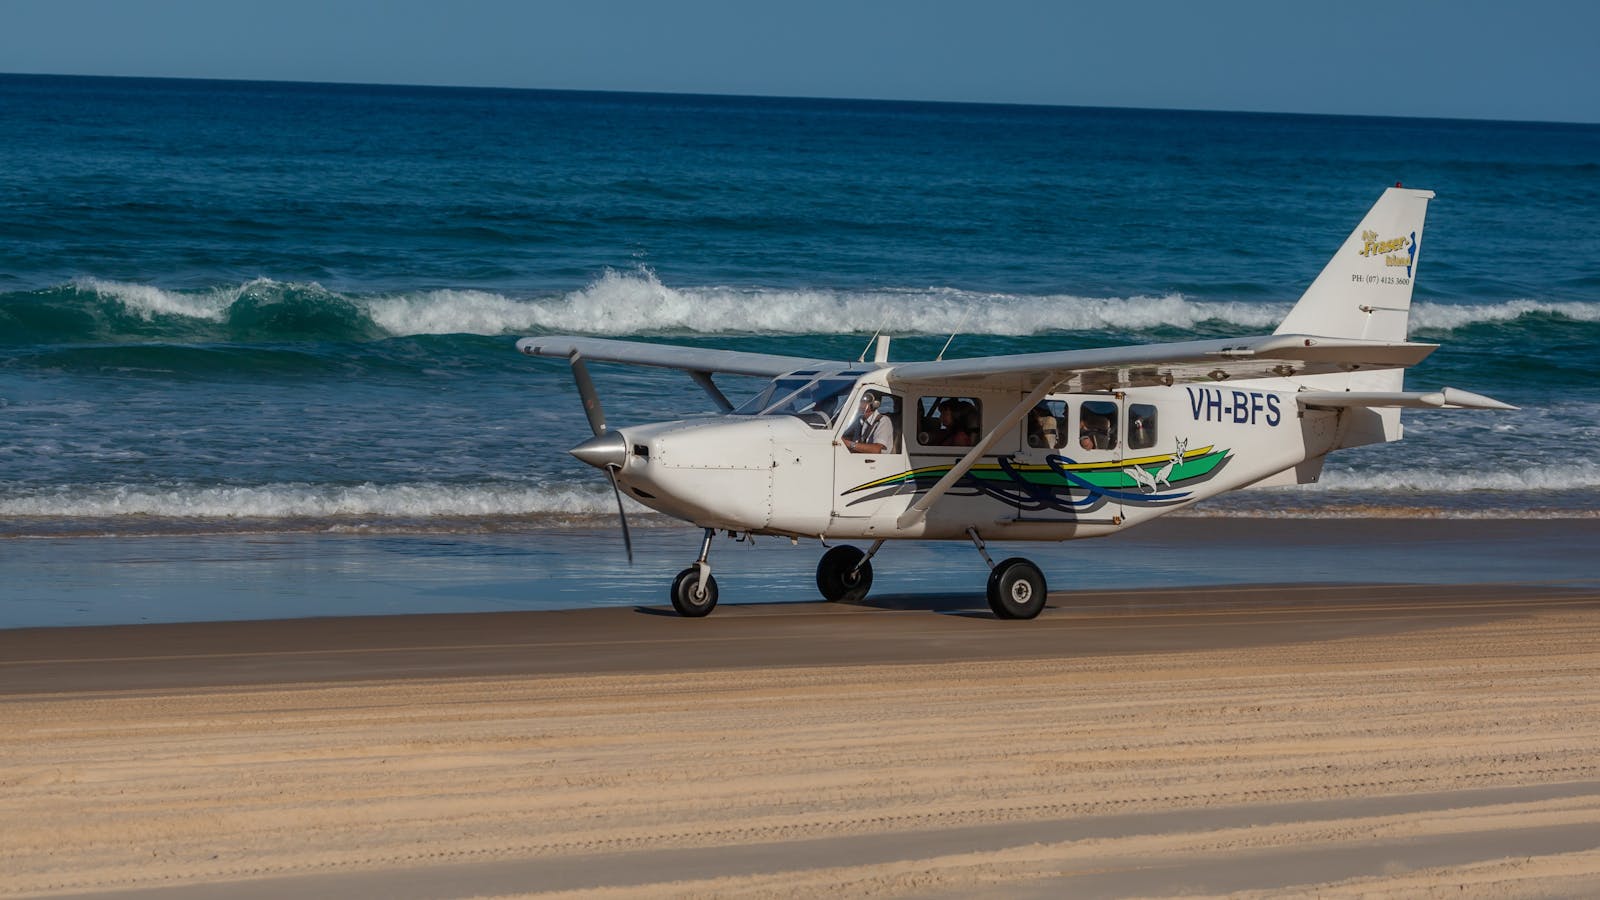 Beach landings and take offs on Fraser Island's 75 mile beach.